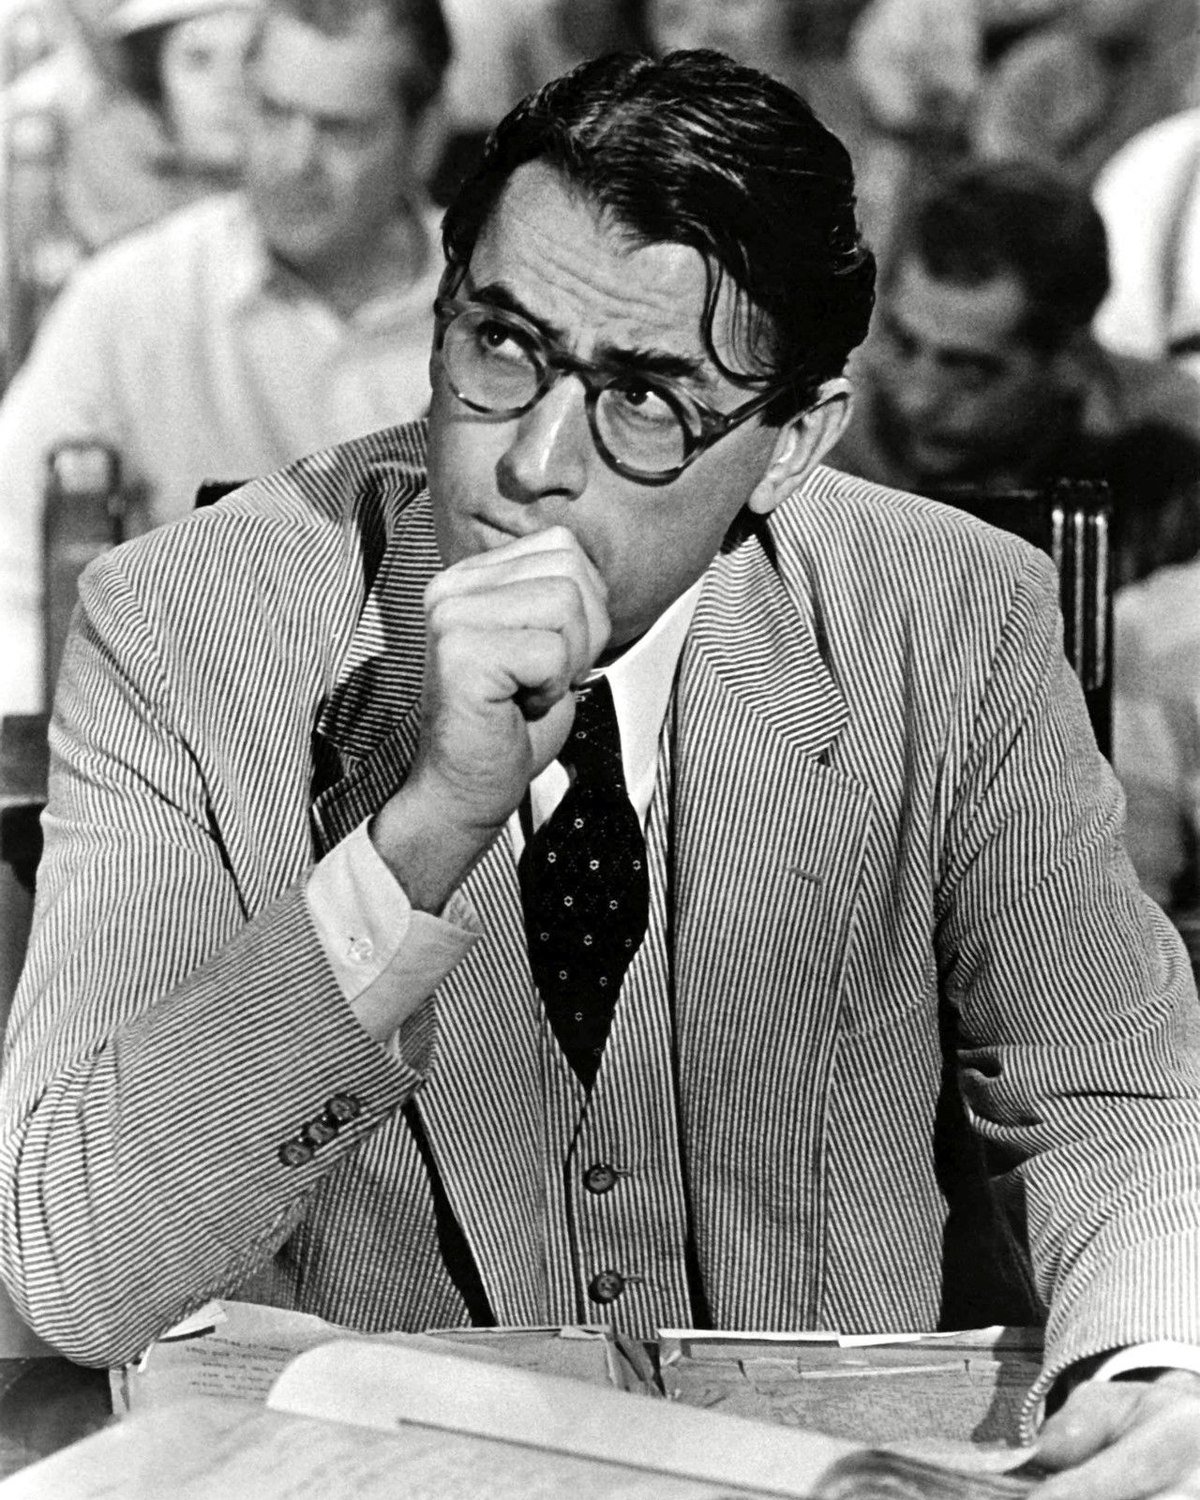 Gregory Peck Net Worth - Who Inherited His Wealth After His Death?